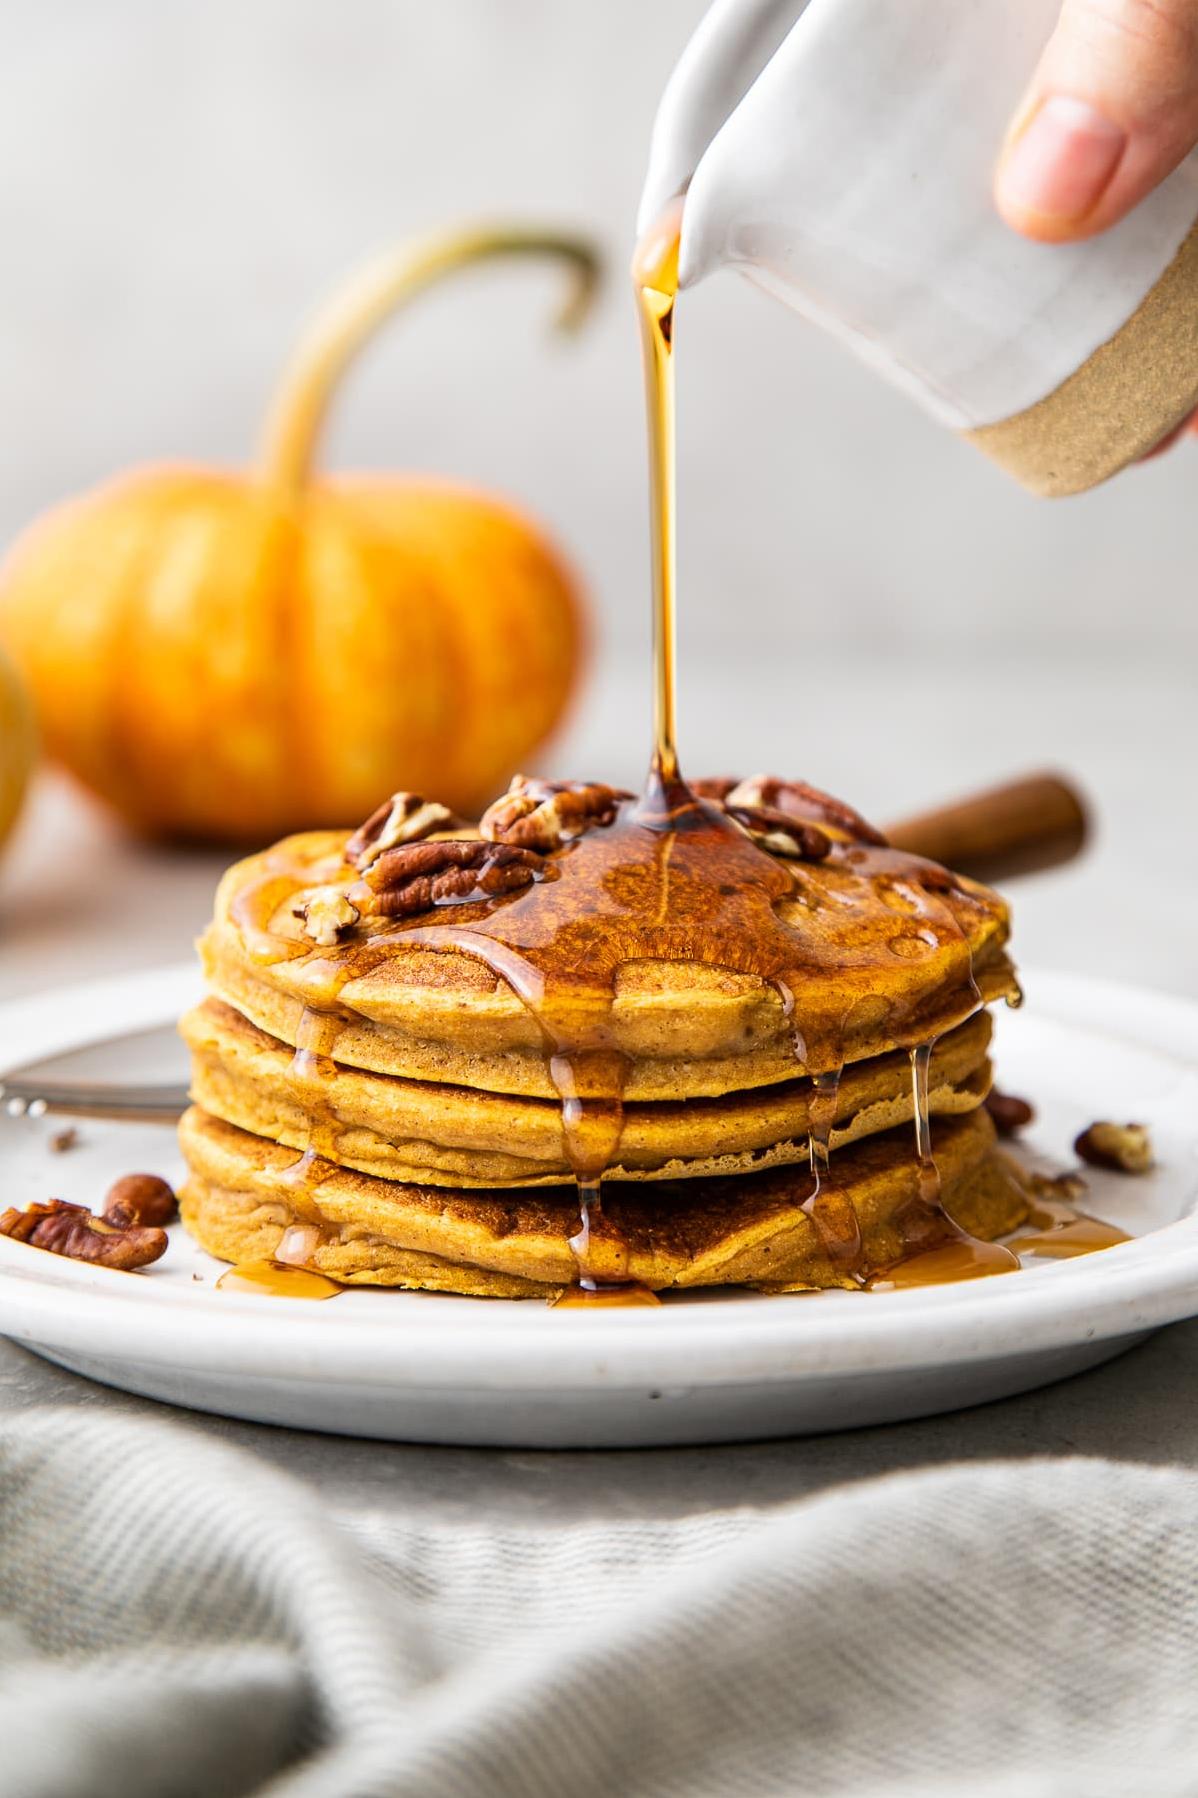  Dive into autumn with these amazing vegan pumpkin pie pancakes that will make your mouth water